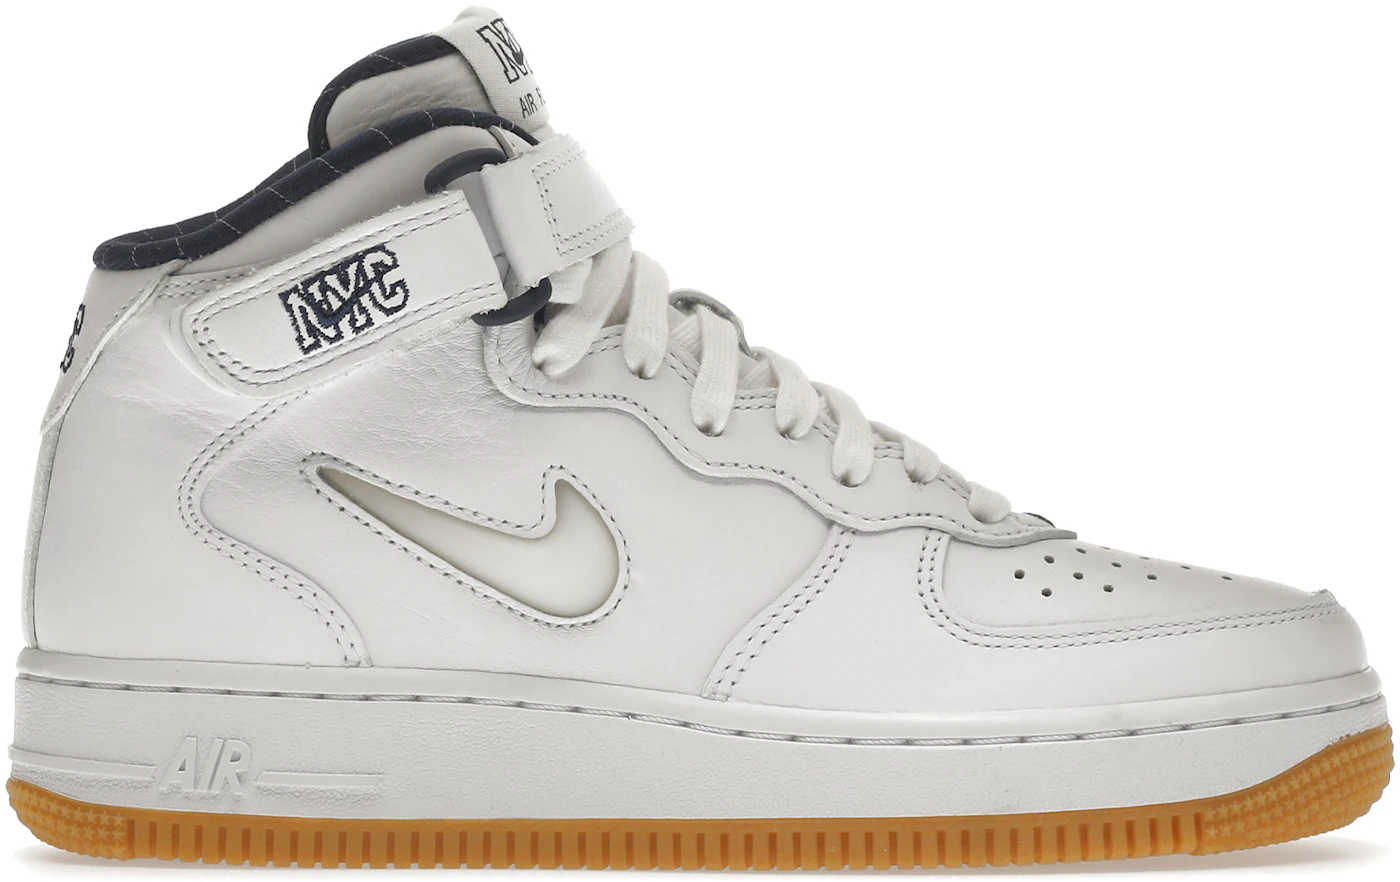 Nike Men's Air Force 1 Mid '07 Basketball Shoe, Size: 9, White